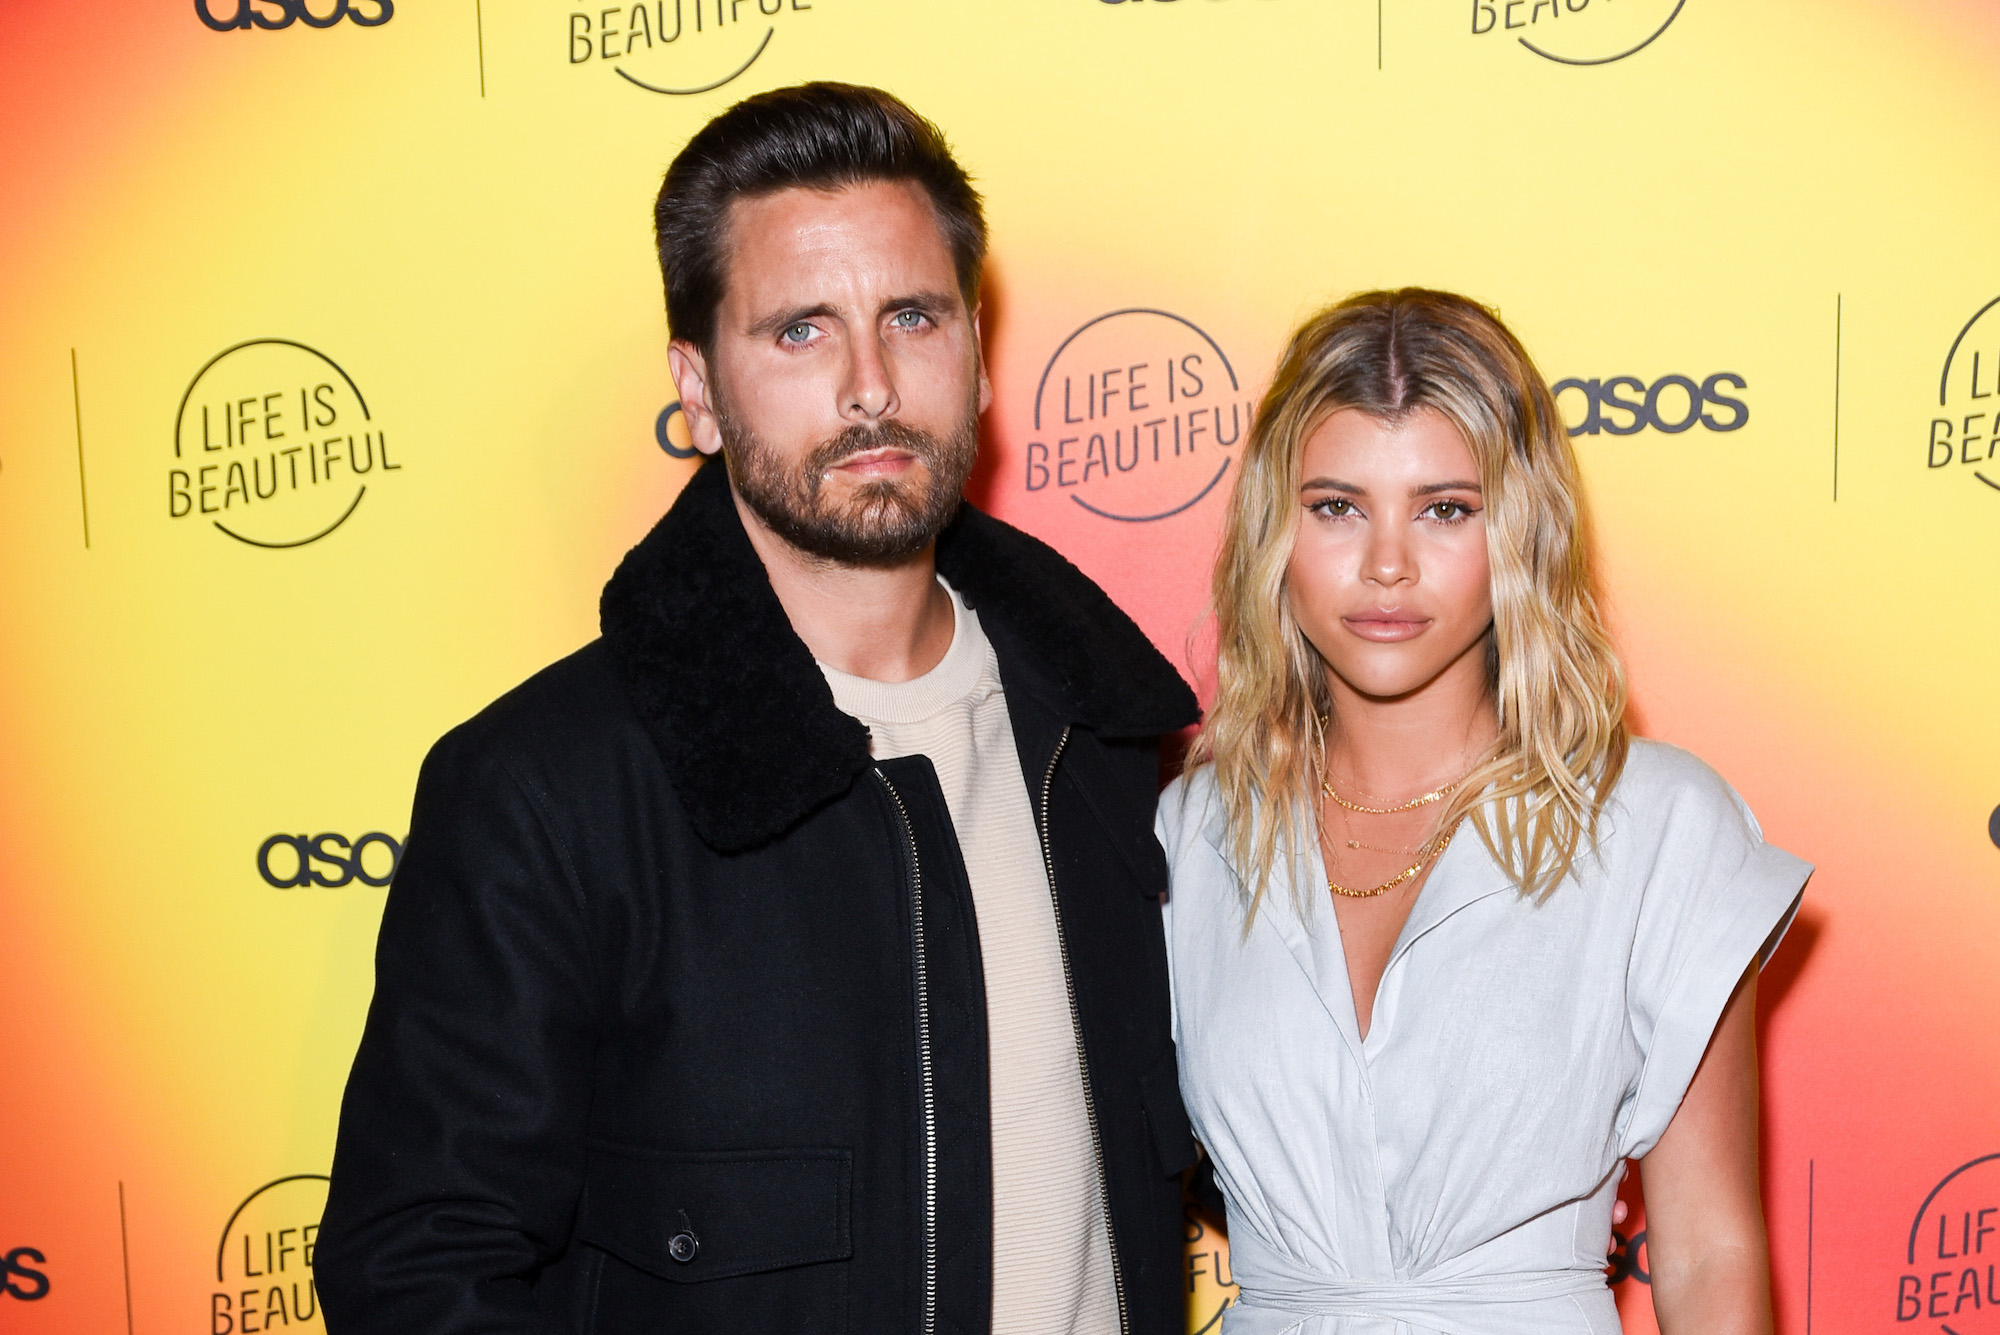 Sofia Richie and Scott Disick Didn’t Work Out, But Fans Still Respect Her as a Person